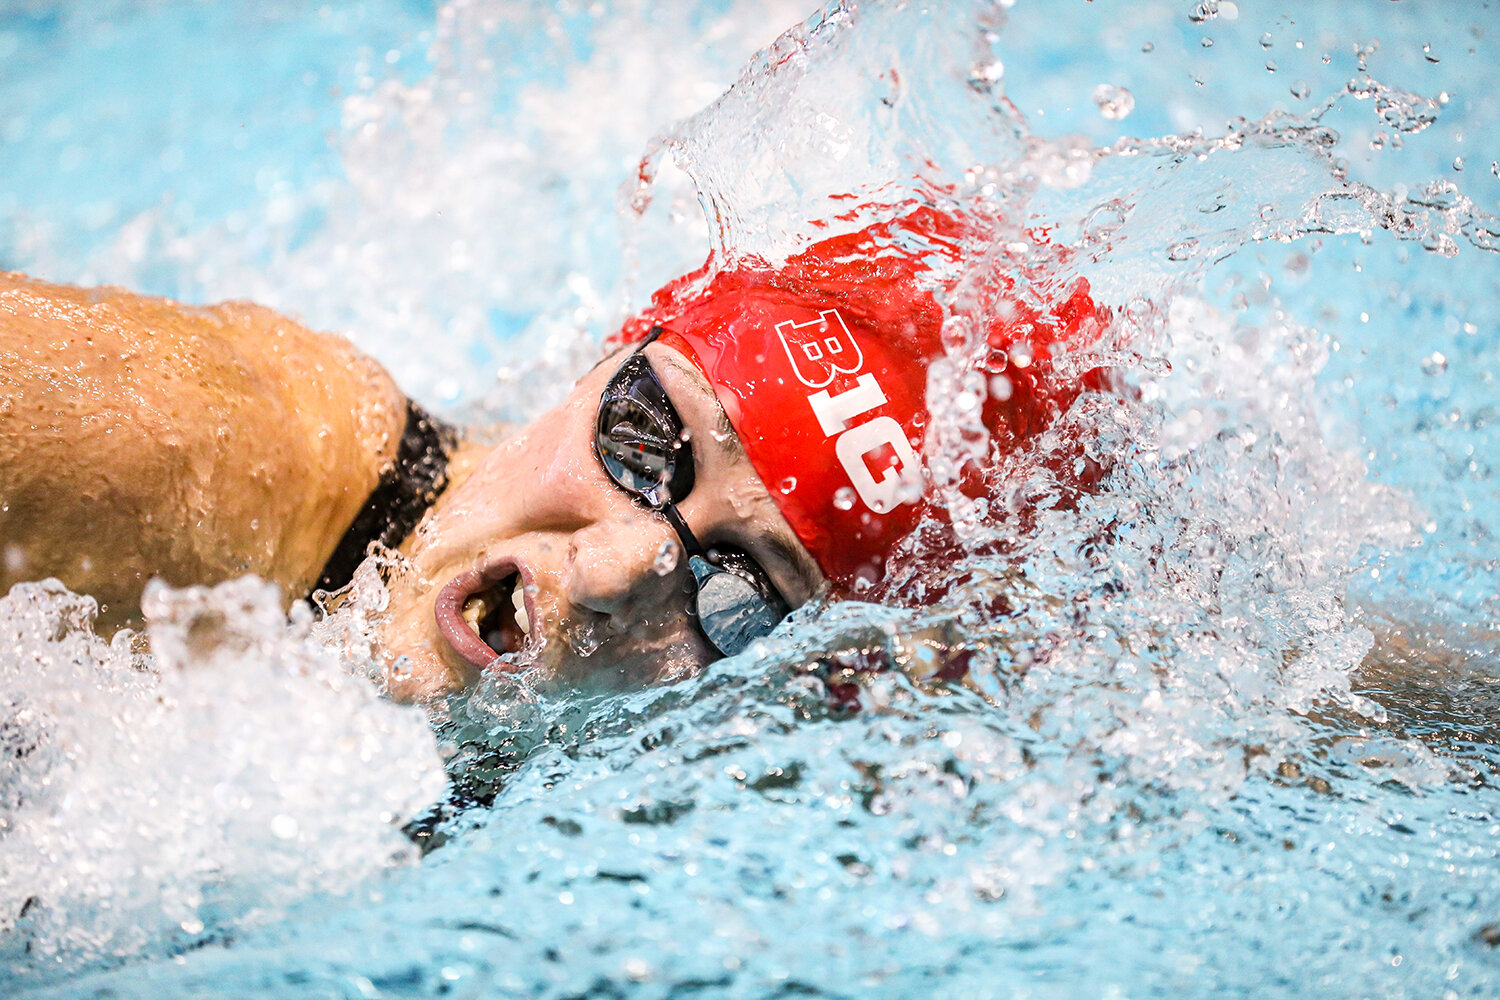  Francesca Bertotto swims the 500 Yard Freestyle Preliminary during the Big Ten Women’s Swimming and Diving Championships at the Campus Welfare and Recreation Center in Iowa City, IA on Thursday, Feb. 20, 2020.  